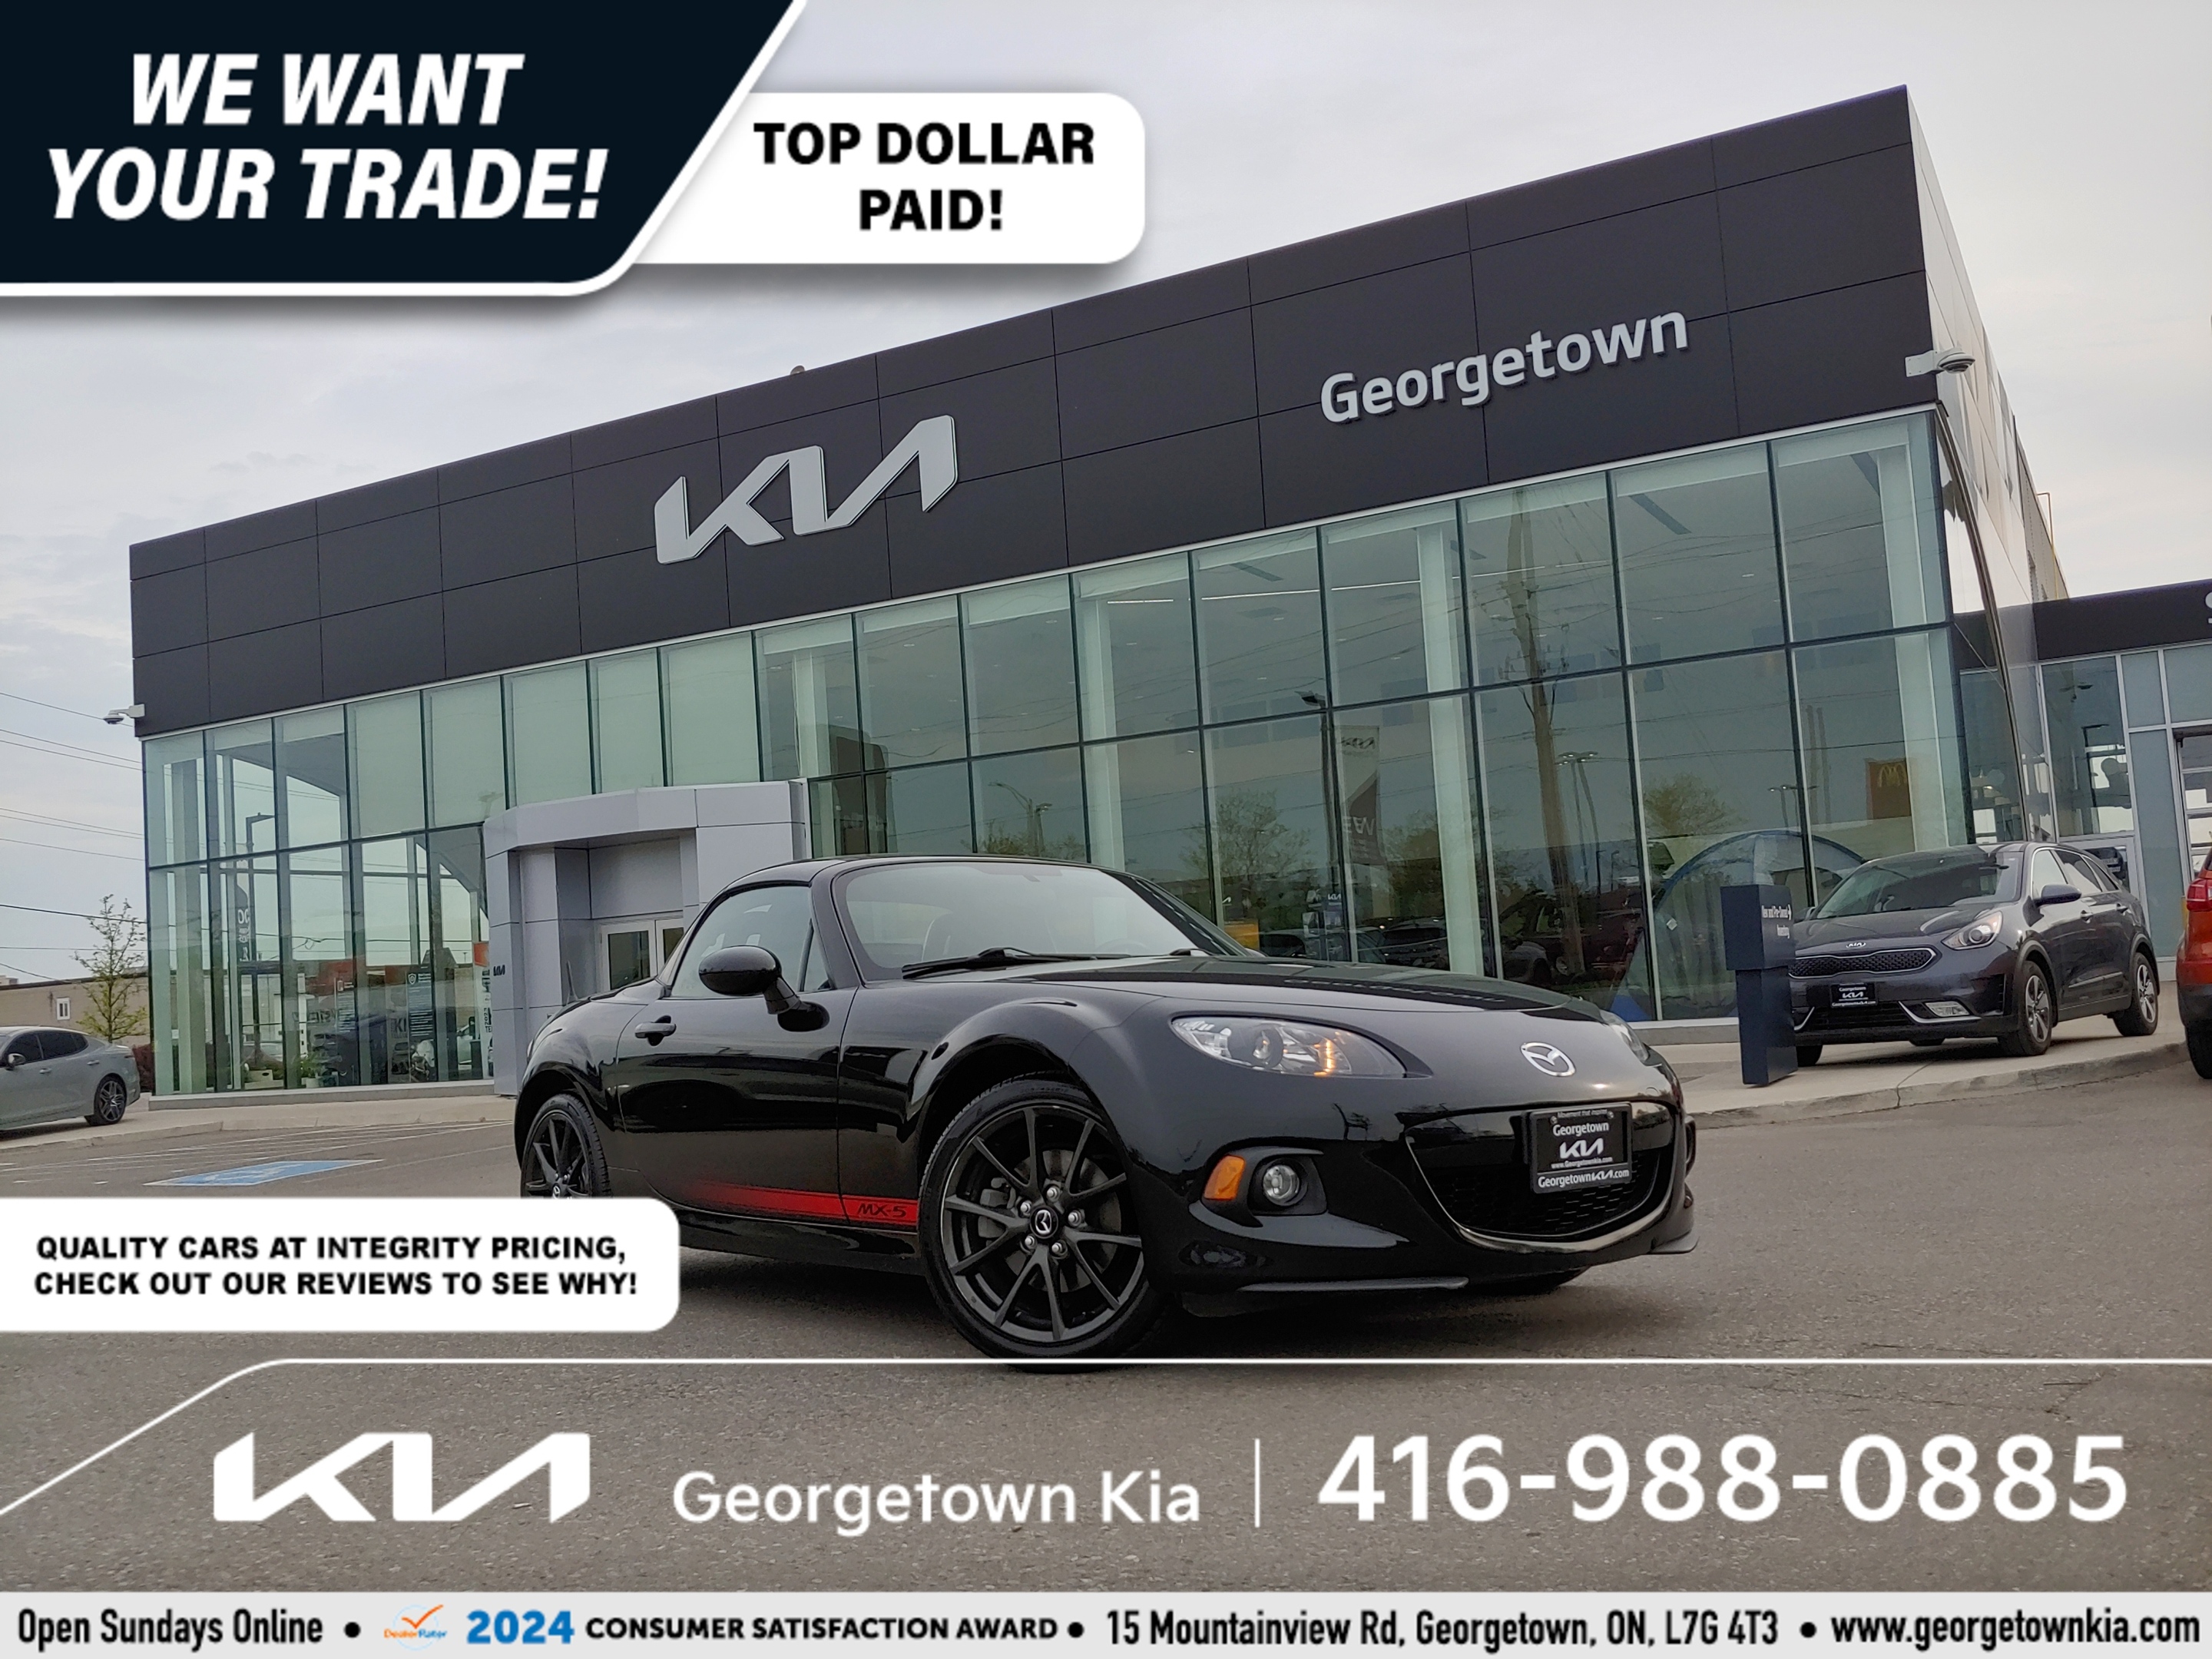 2013 Mazda MX-5 GS 2.0L RWD | CONVERTIBLE | ONLY 41K KM